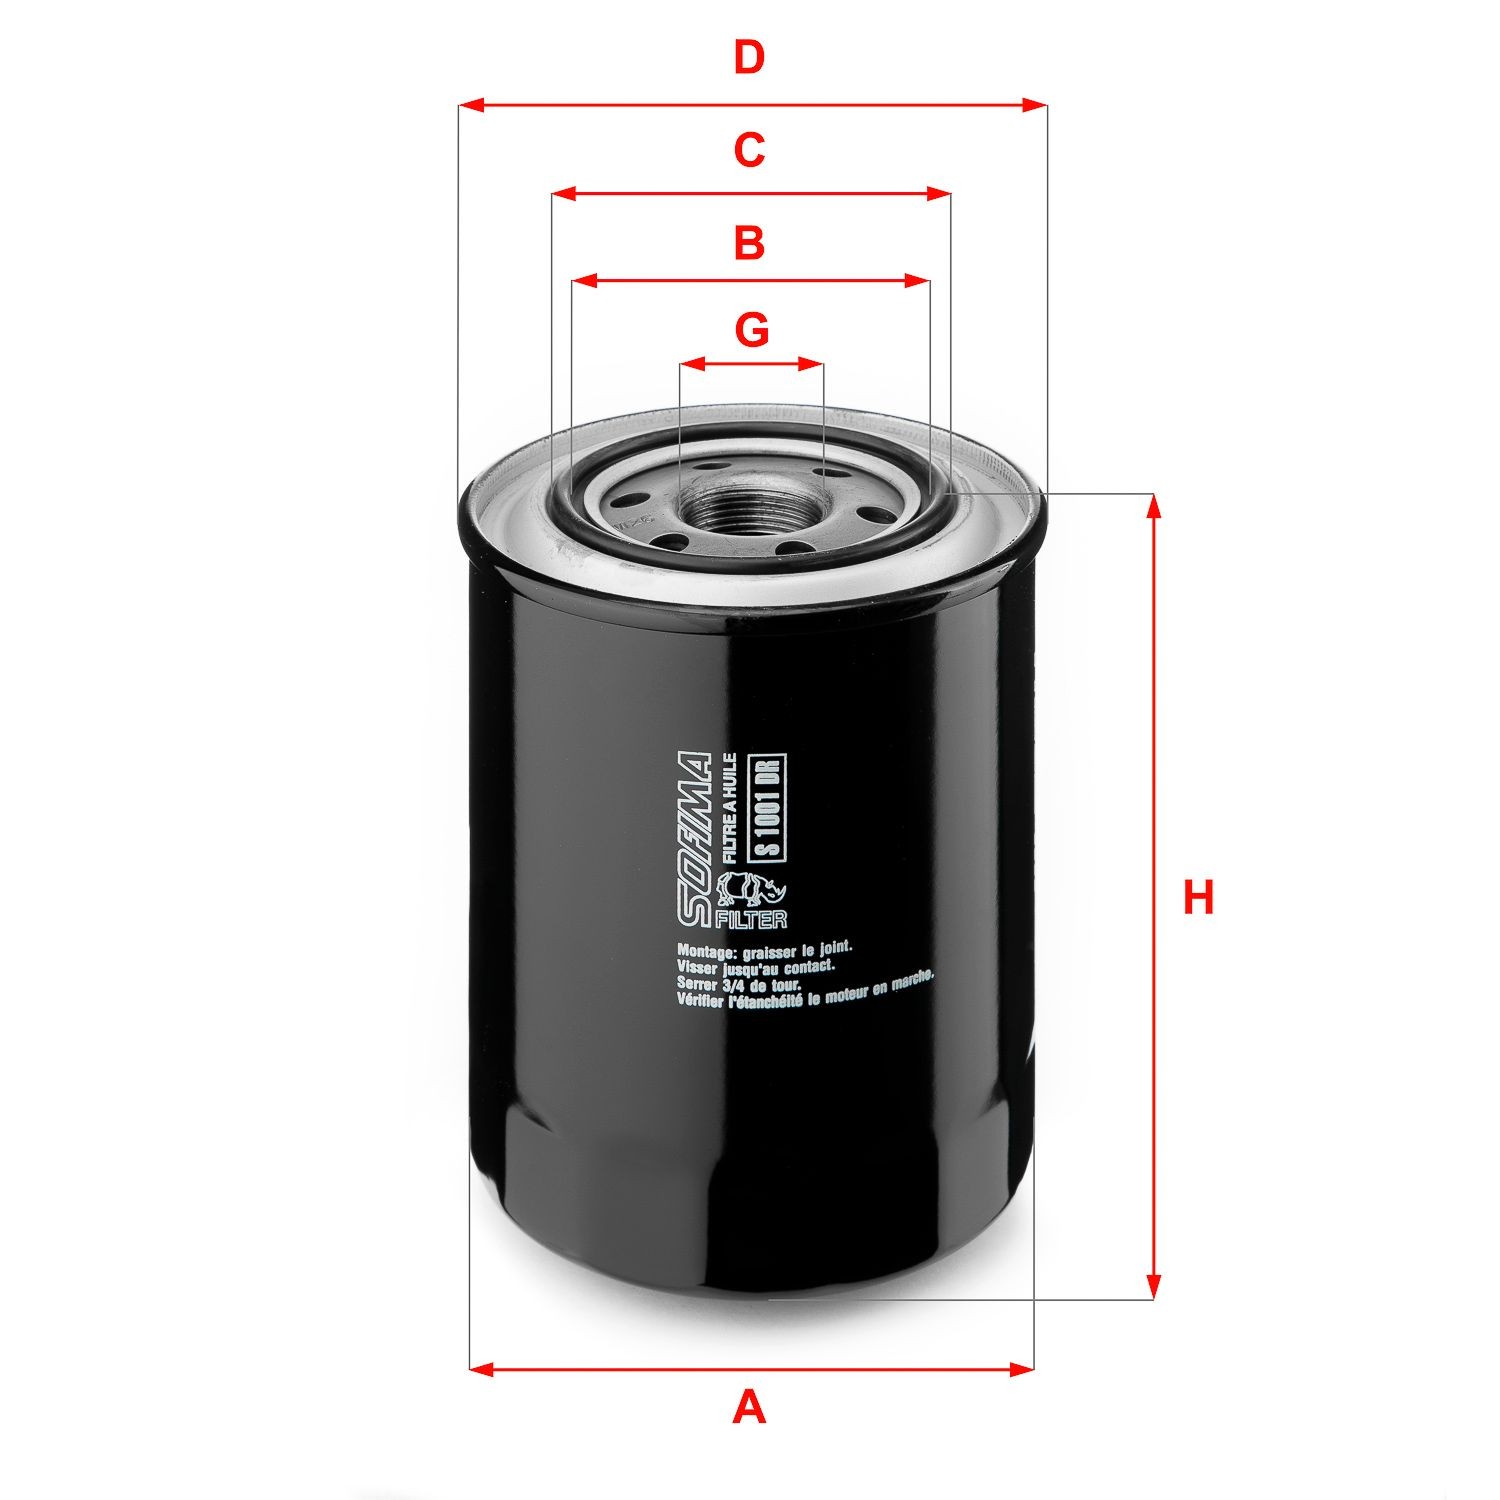 SOFIMA S 1001 DR Oil filter M 26 X 1,5, with one anti-return valve, Spin-on Filter